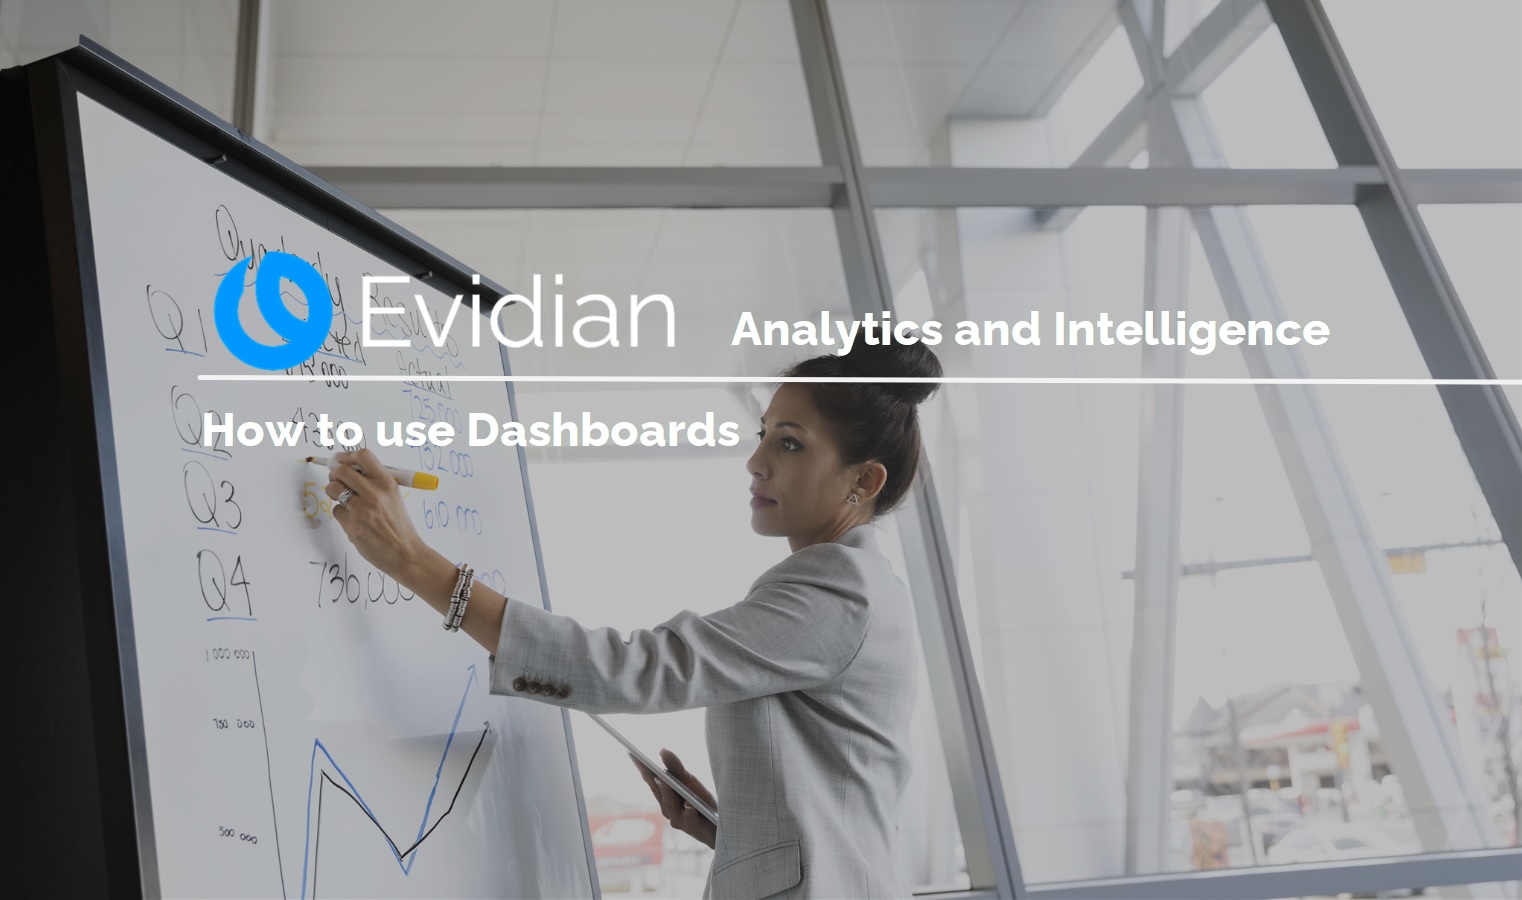 How to use analytics dashboards of Evidian IAM